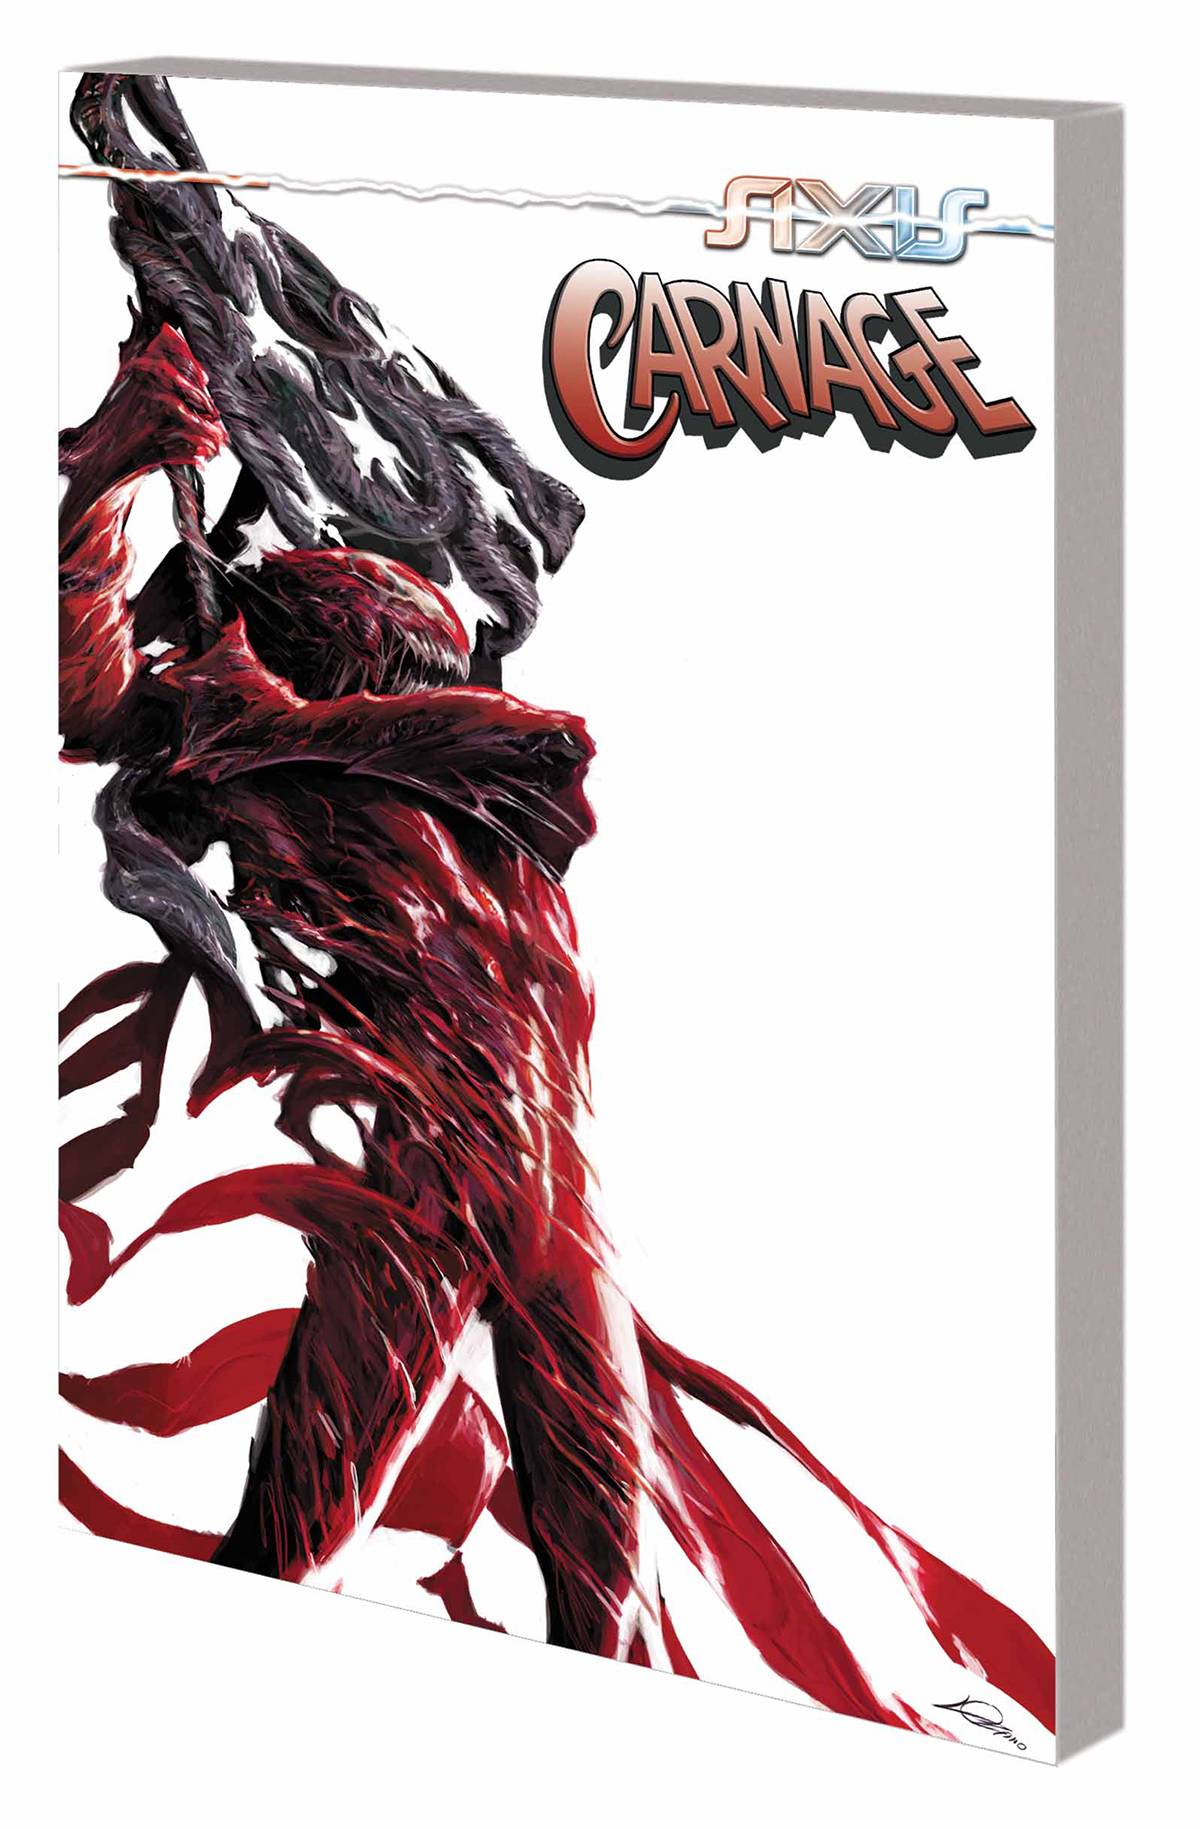 Axis carnage